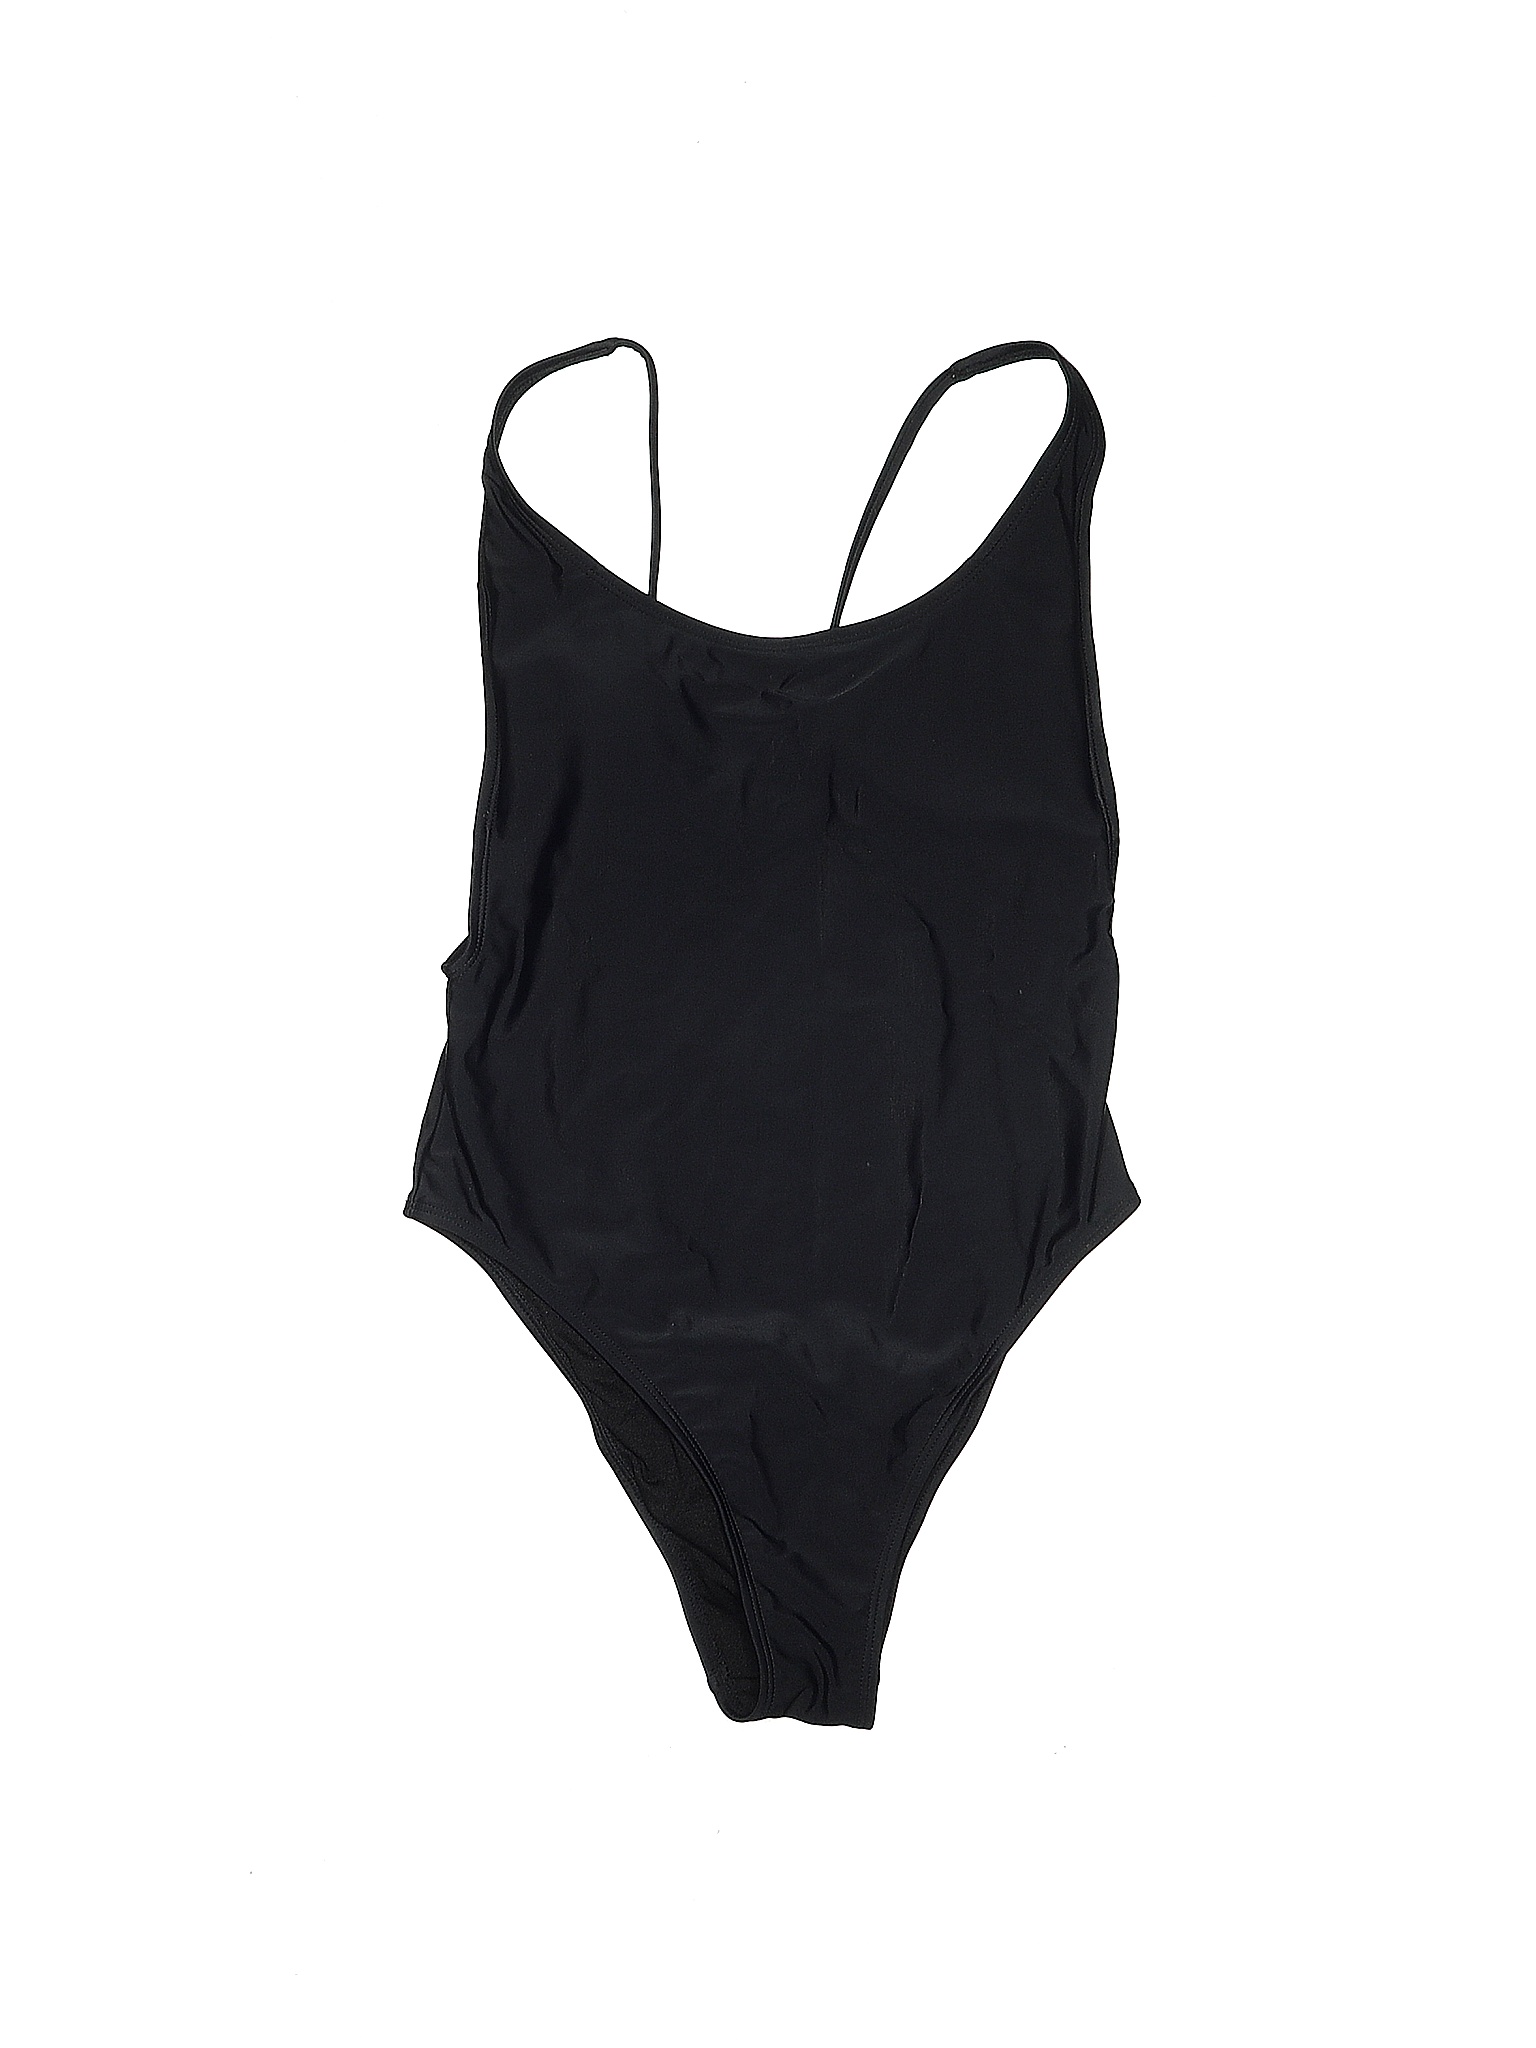 Xhilaration 100% Recycled Plastic Solid Black One Piece Swimsuit Size S ...